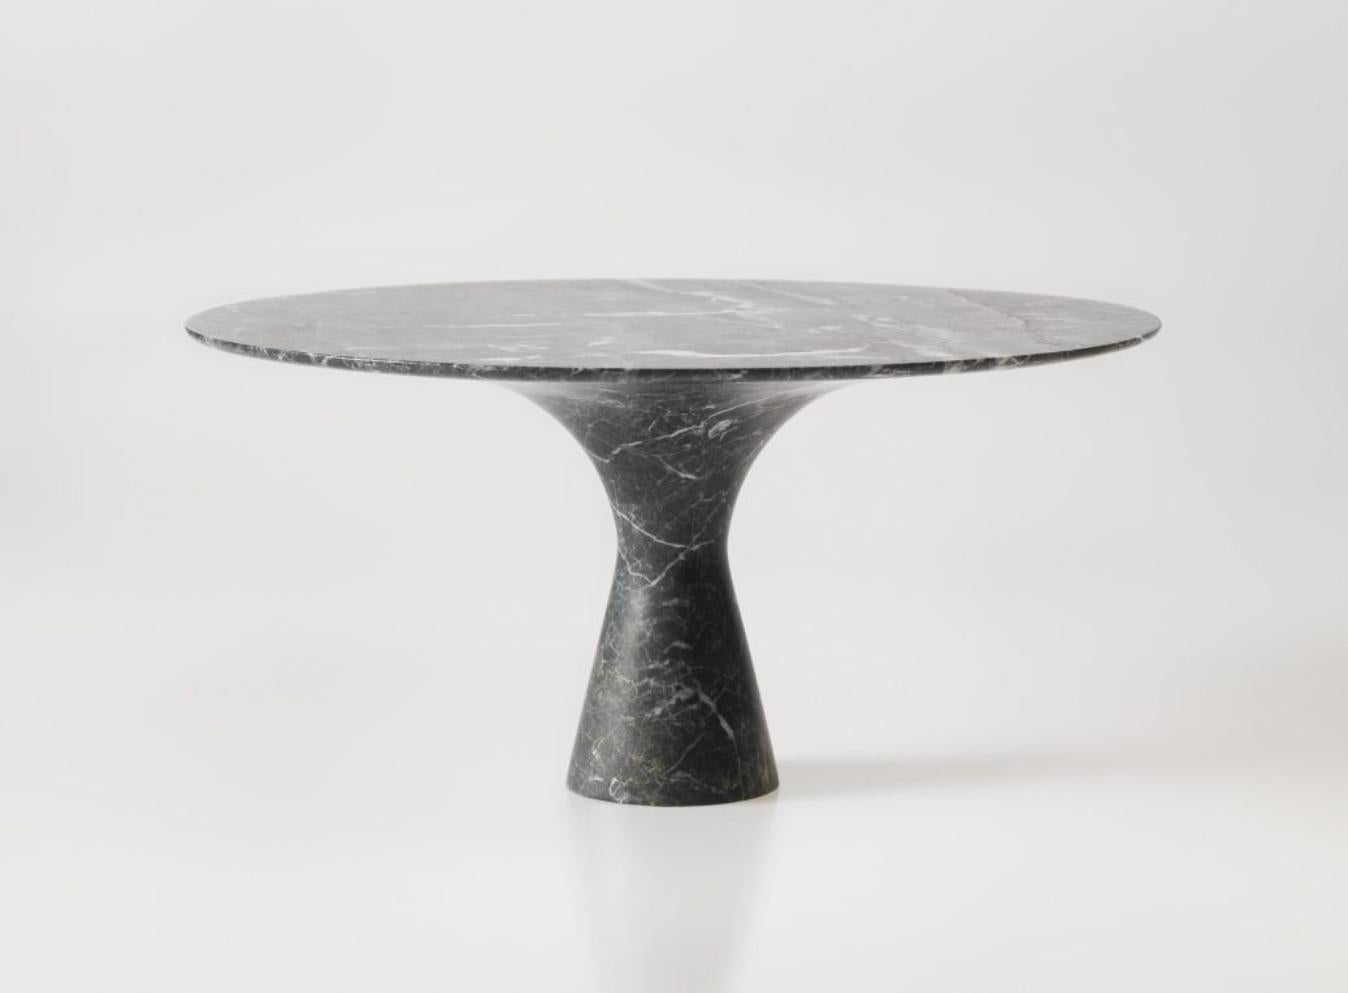 Grey Saint Laurent Refined Contemporary Marble Low Round Table 27/100 For Sale 2